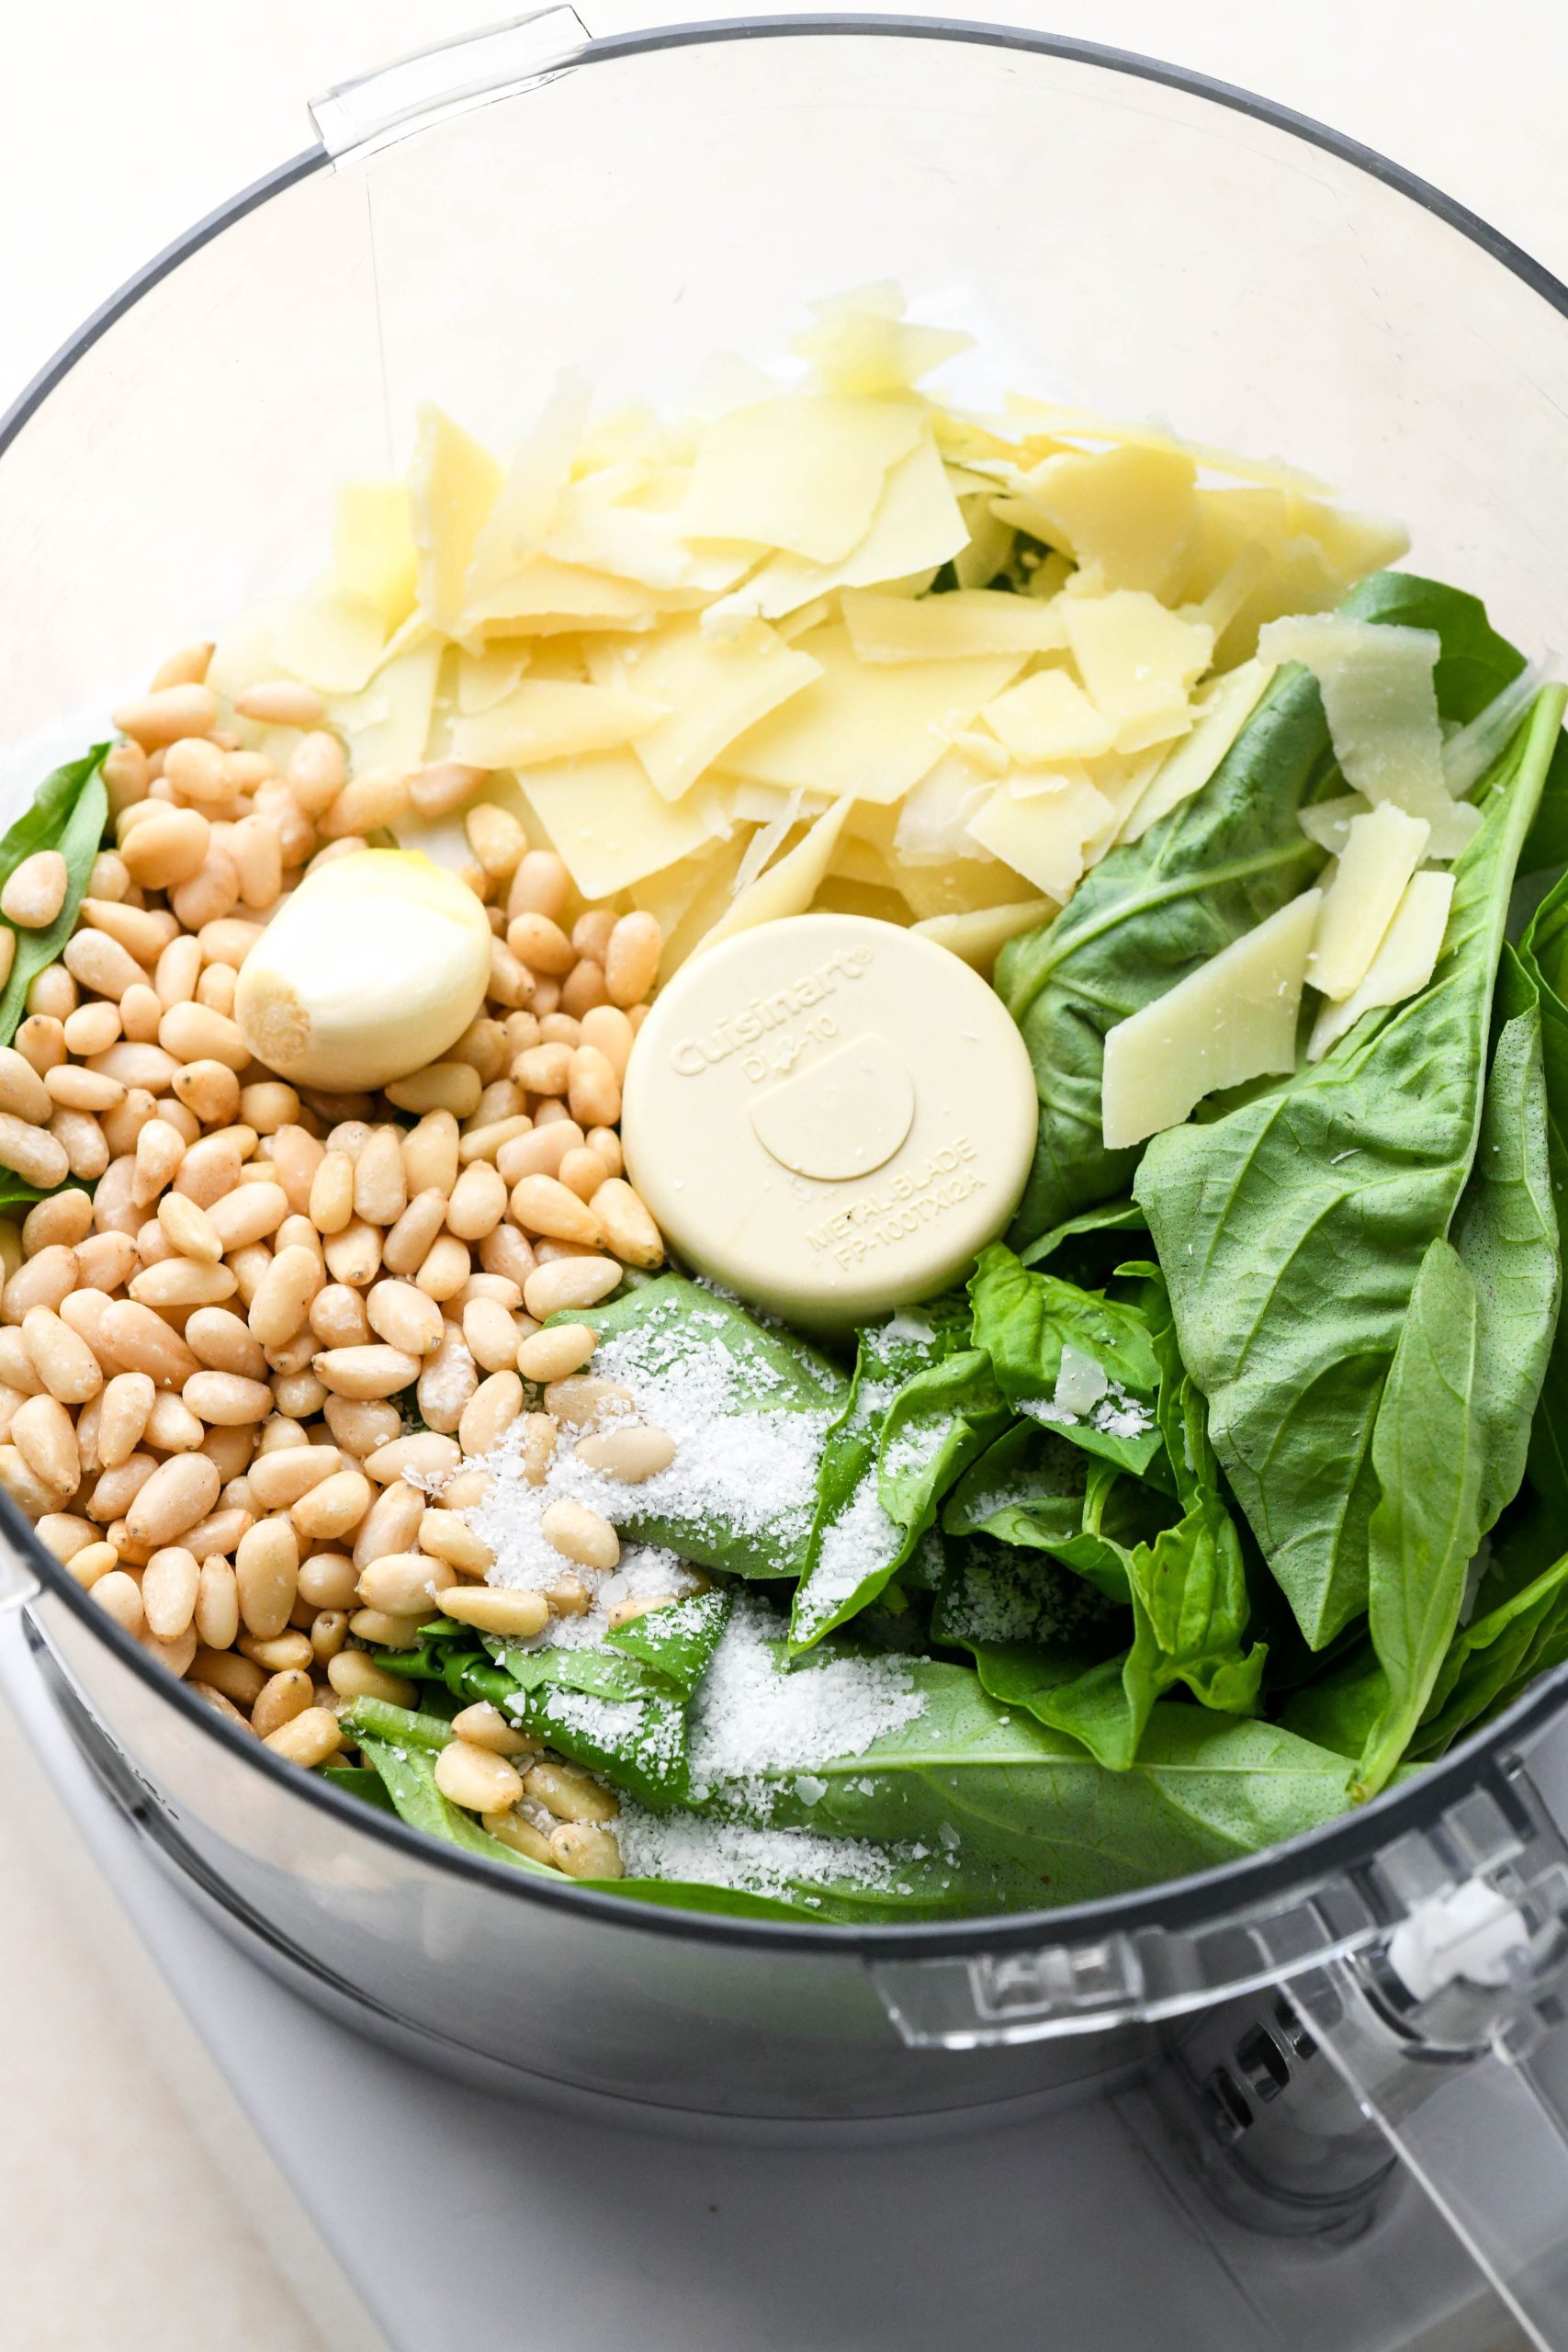 How to make homemade basil pesto: Ingredients for pesto in a food processor container before processing.